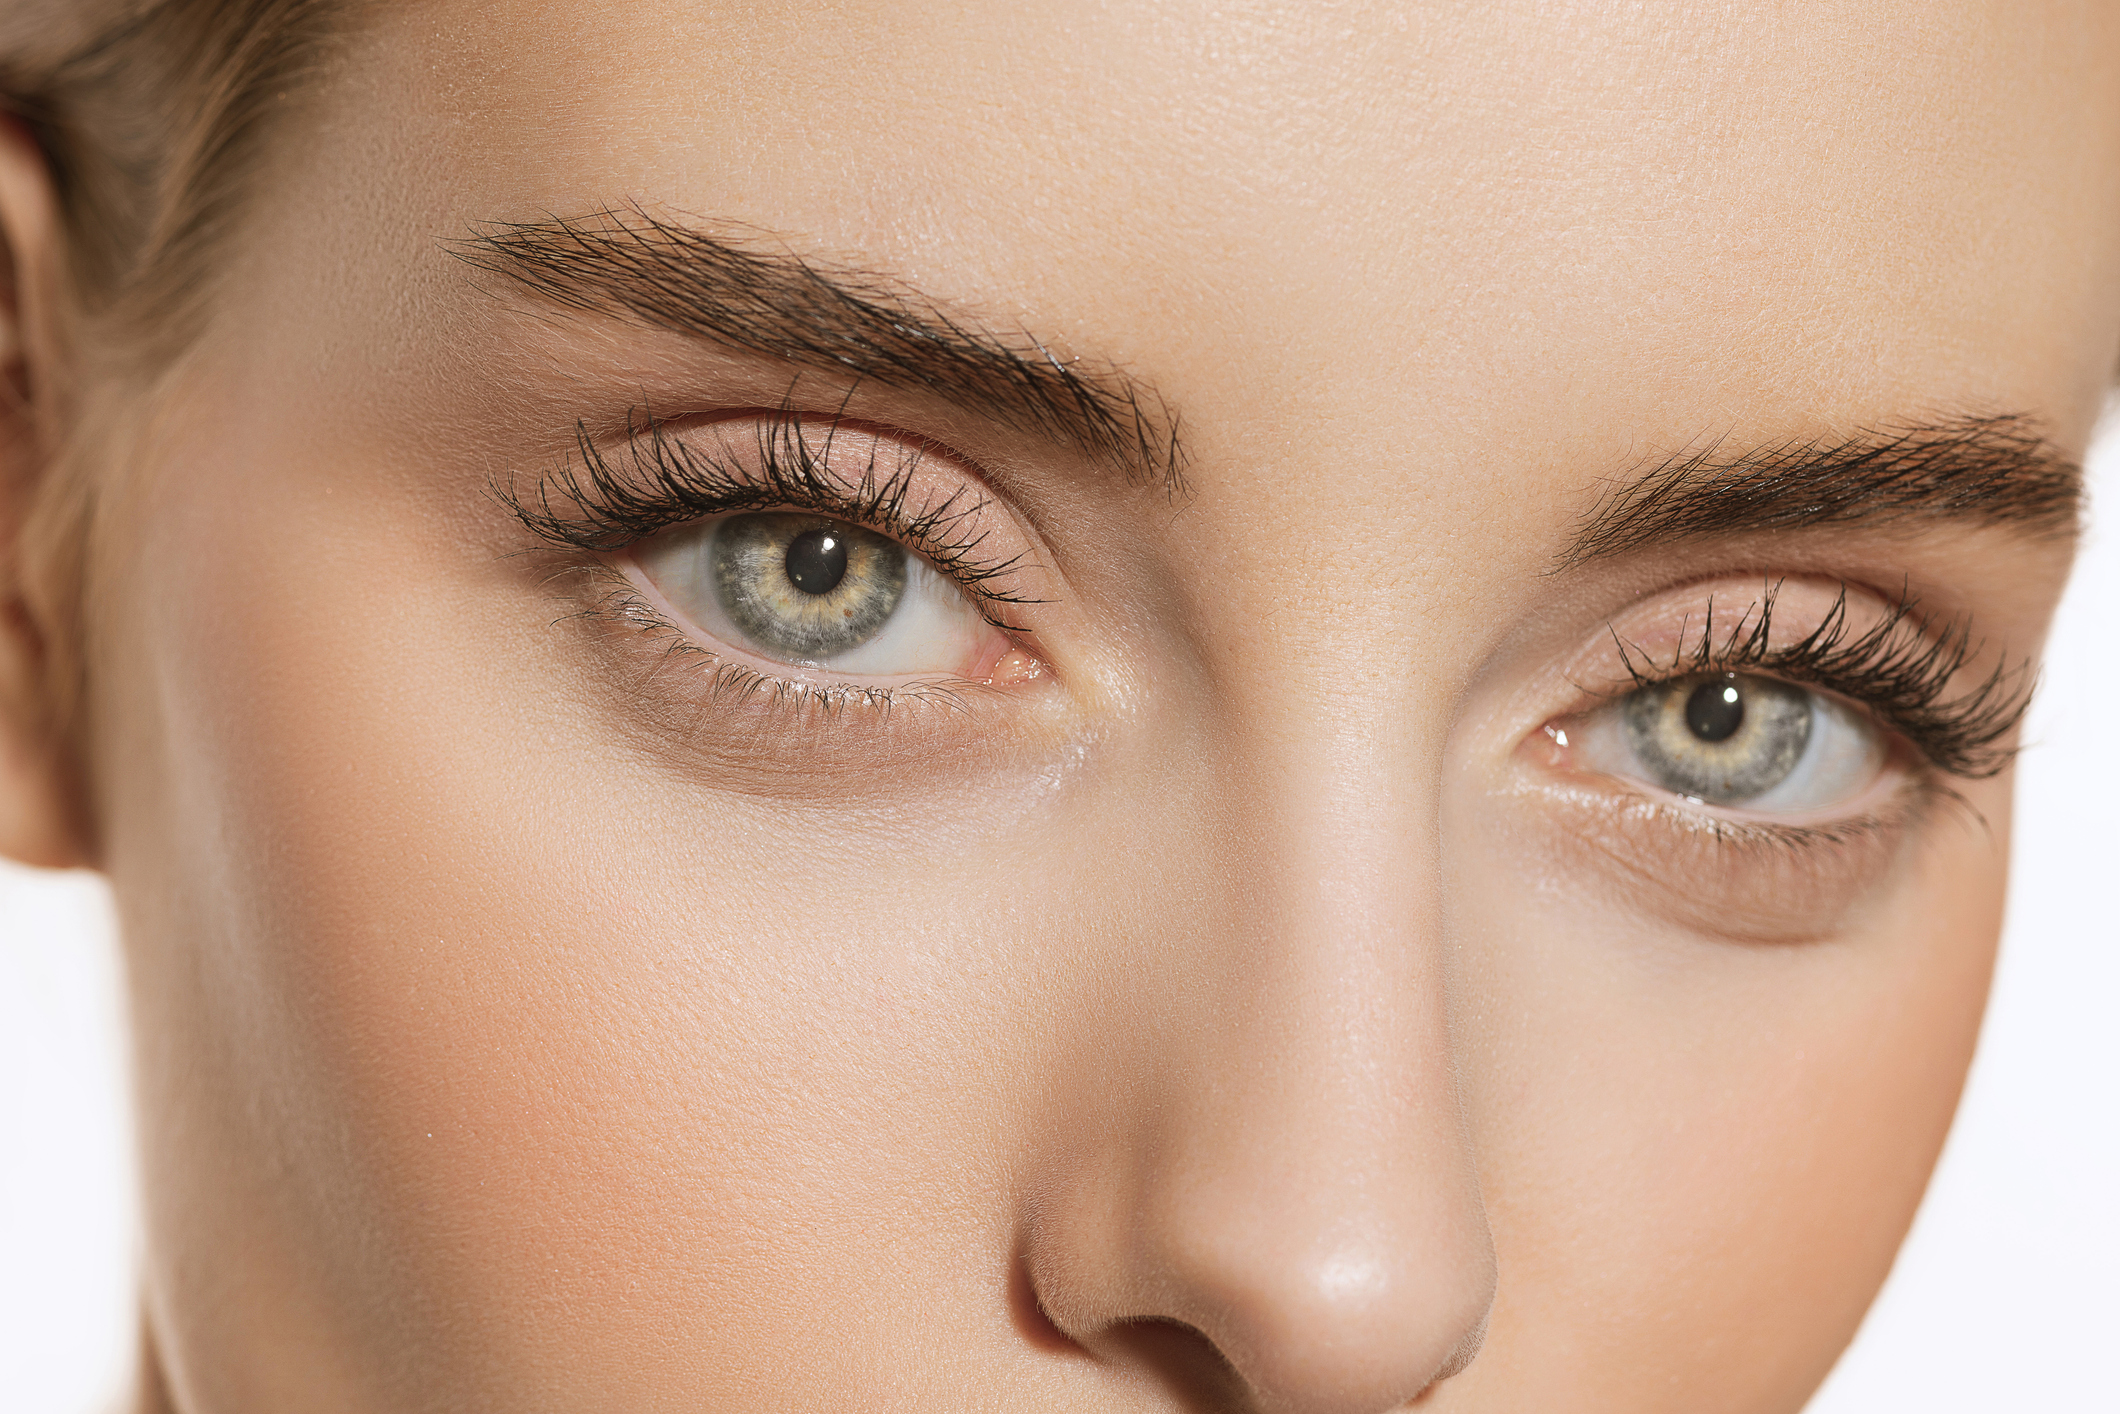 Upper Blepharoplasty, Brow Lift, or Both: A Clinical Decision-Making Guide